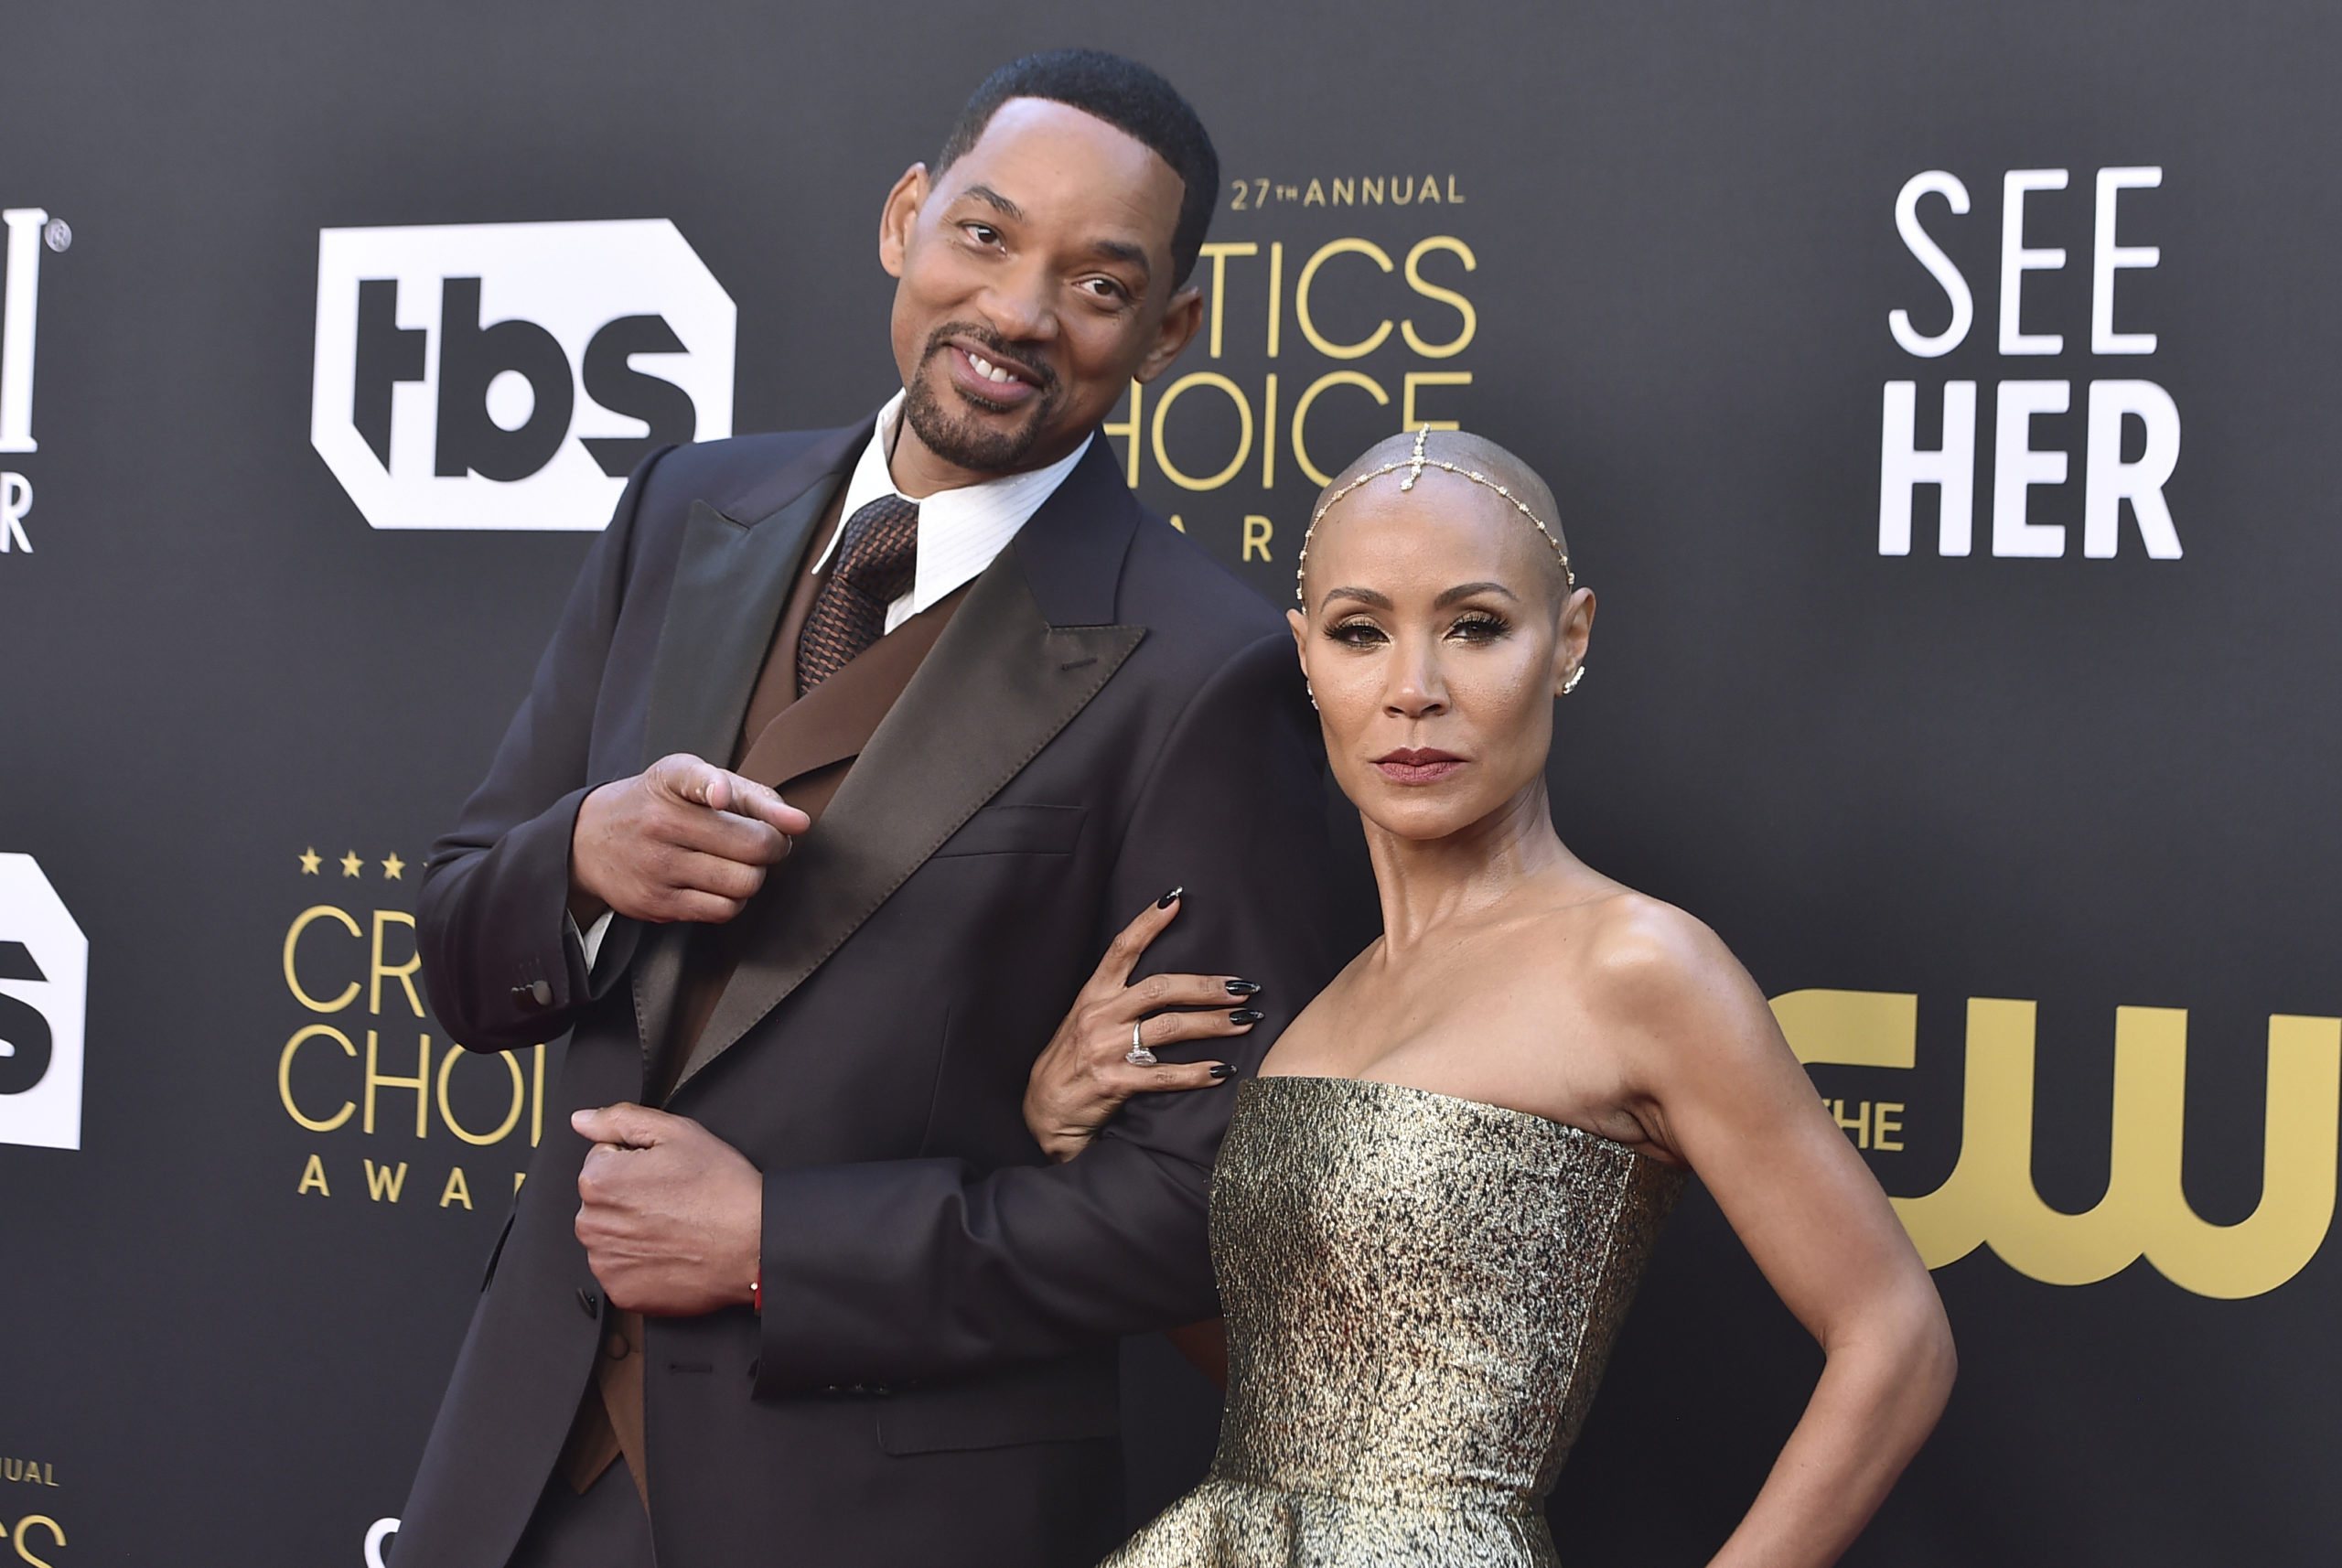 Will Smith, left, and Jada Pinkett Smith, seen at a March 2022 event, have lived what Pinkett-Smith says are “completely separate lives” since 2016. She made the revelation in an interview with Hoda Kotb.